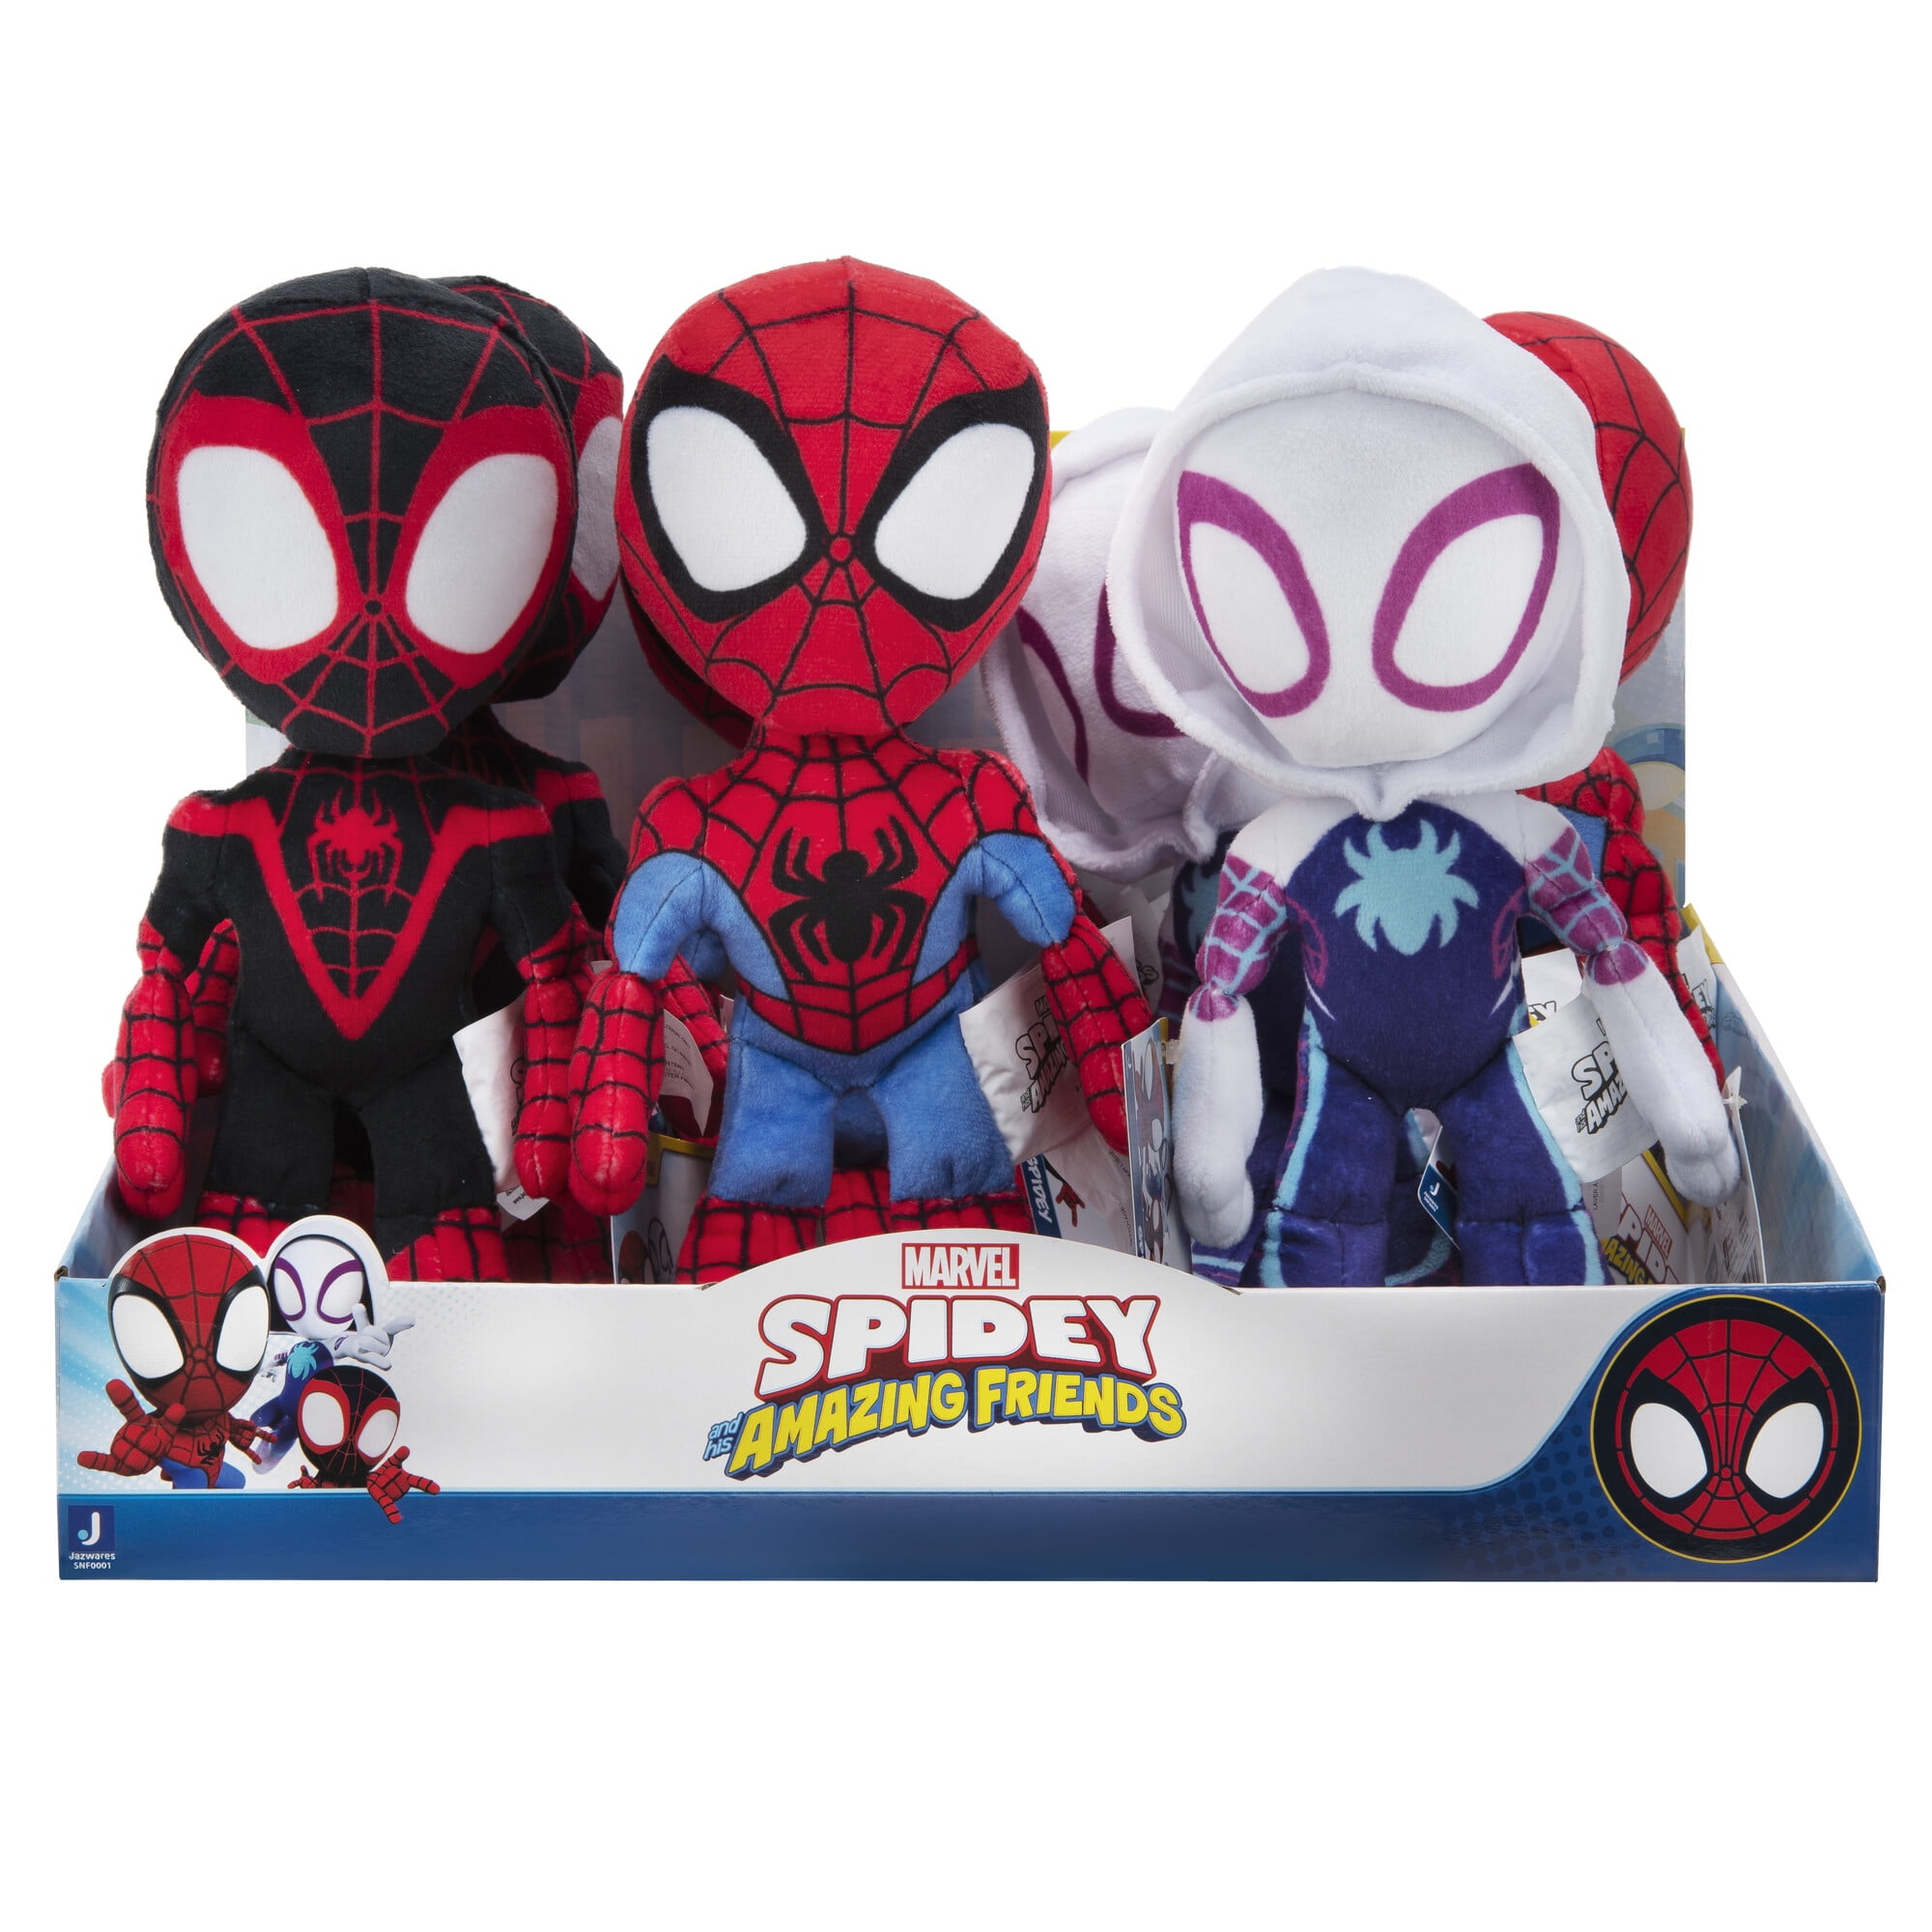 Spidey and His Amazing Friends 8" Spidey Plush Asrt